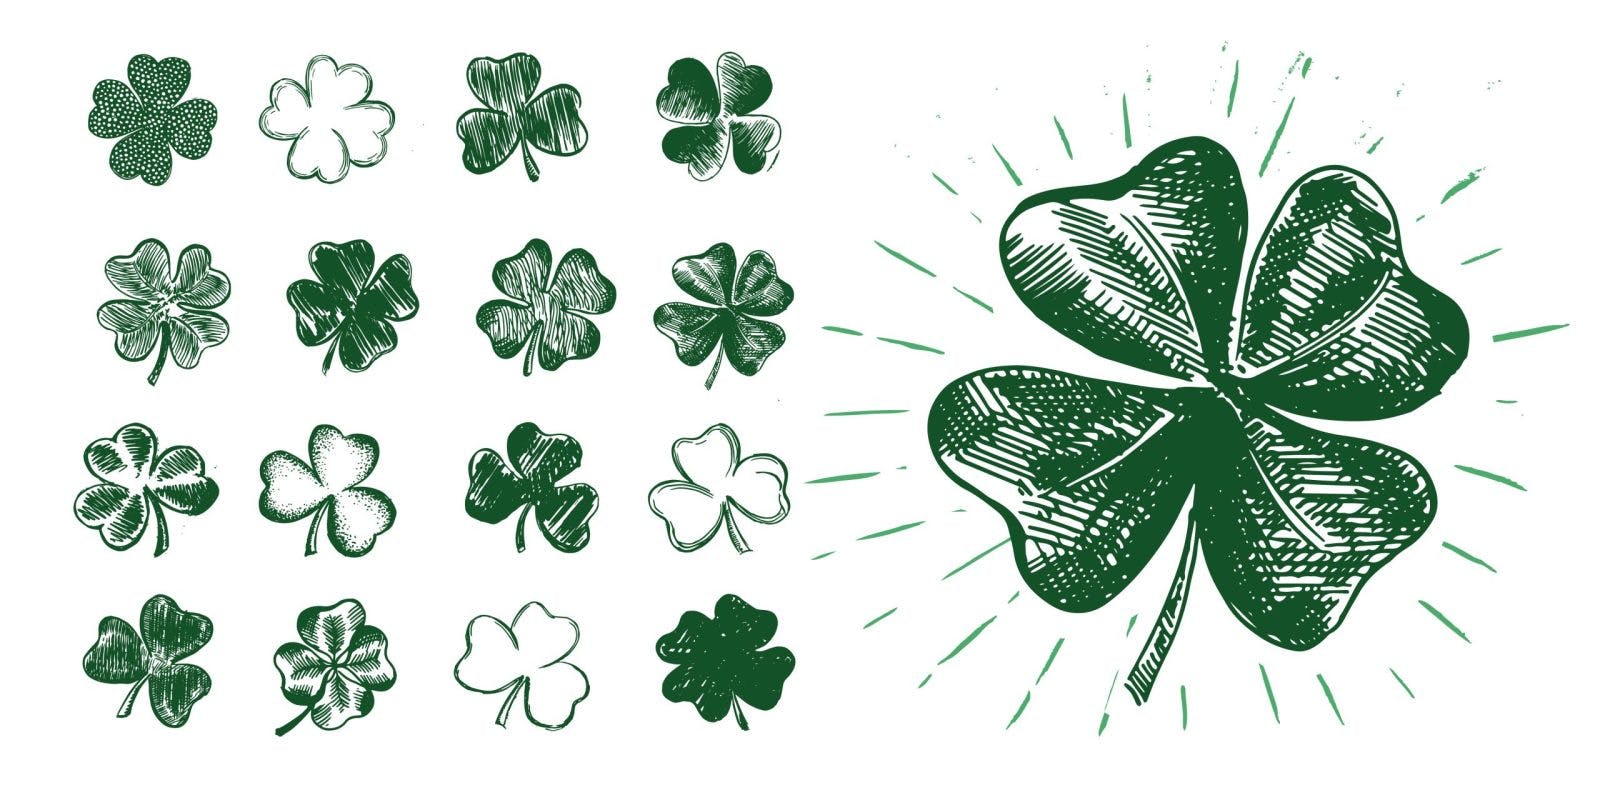 The 15 Most Interesting St. Patrick’s Day Facts